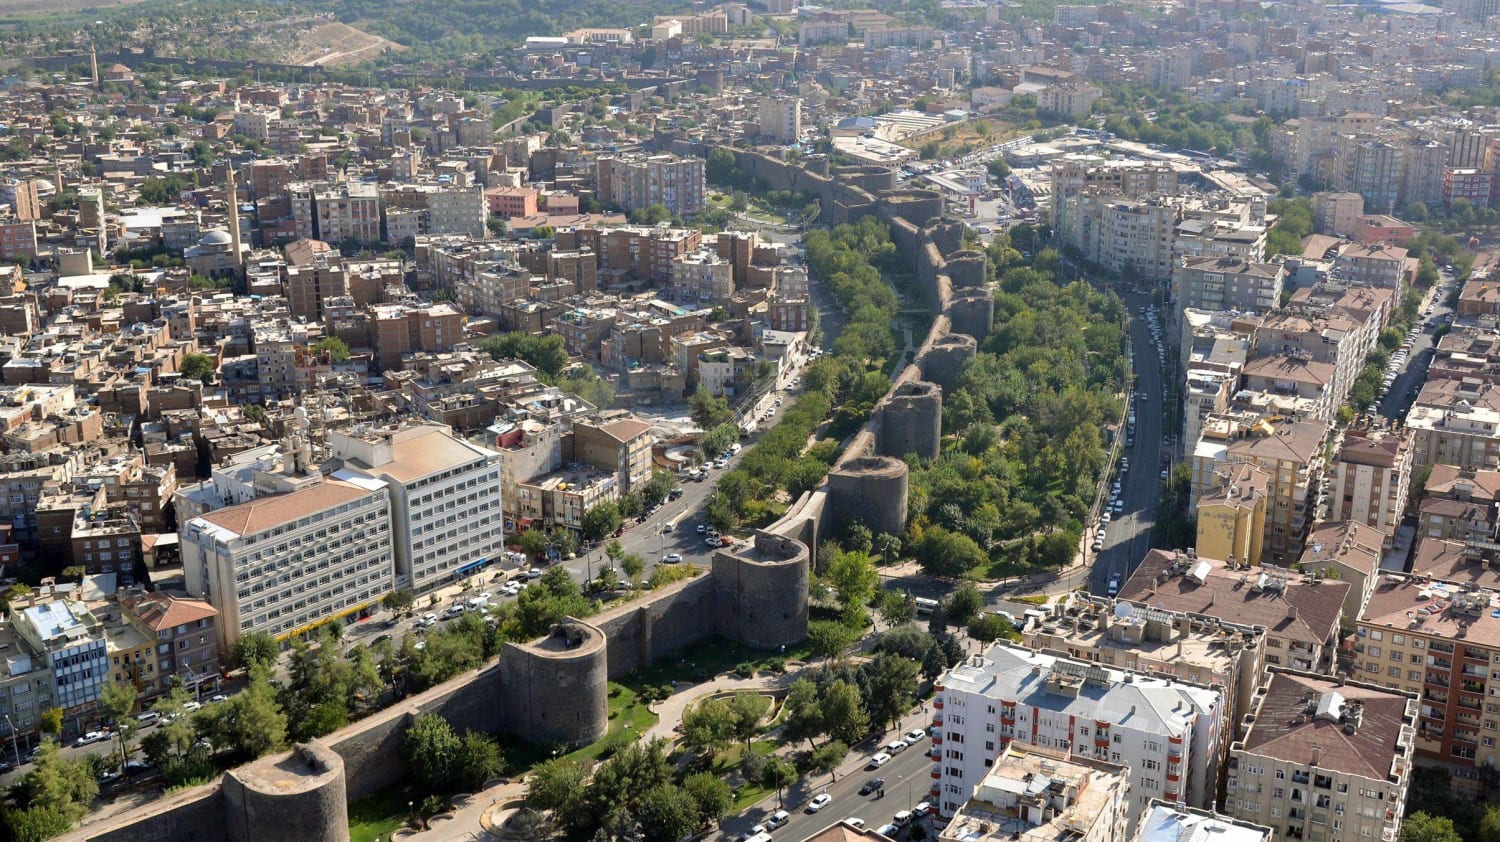 The city walls of Diyarbekir, southern Turkey, one of the great historic cities of the Near East and a centre of Assyrian, Armenian and Kurdish civilisations. Built by Roman emperors between 367 and 375, they are the longest and widest continuous city walls anywhere in the world.